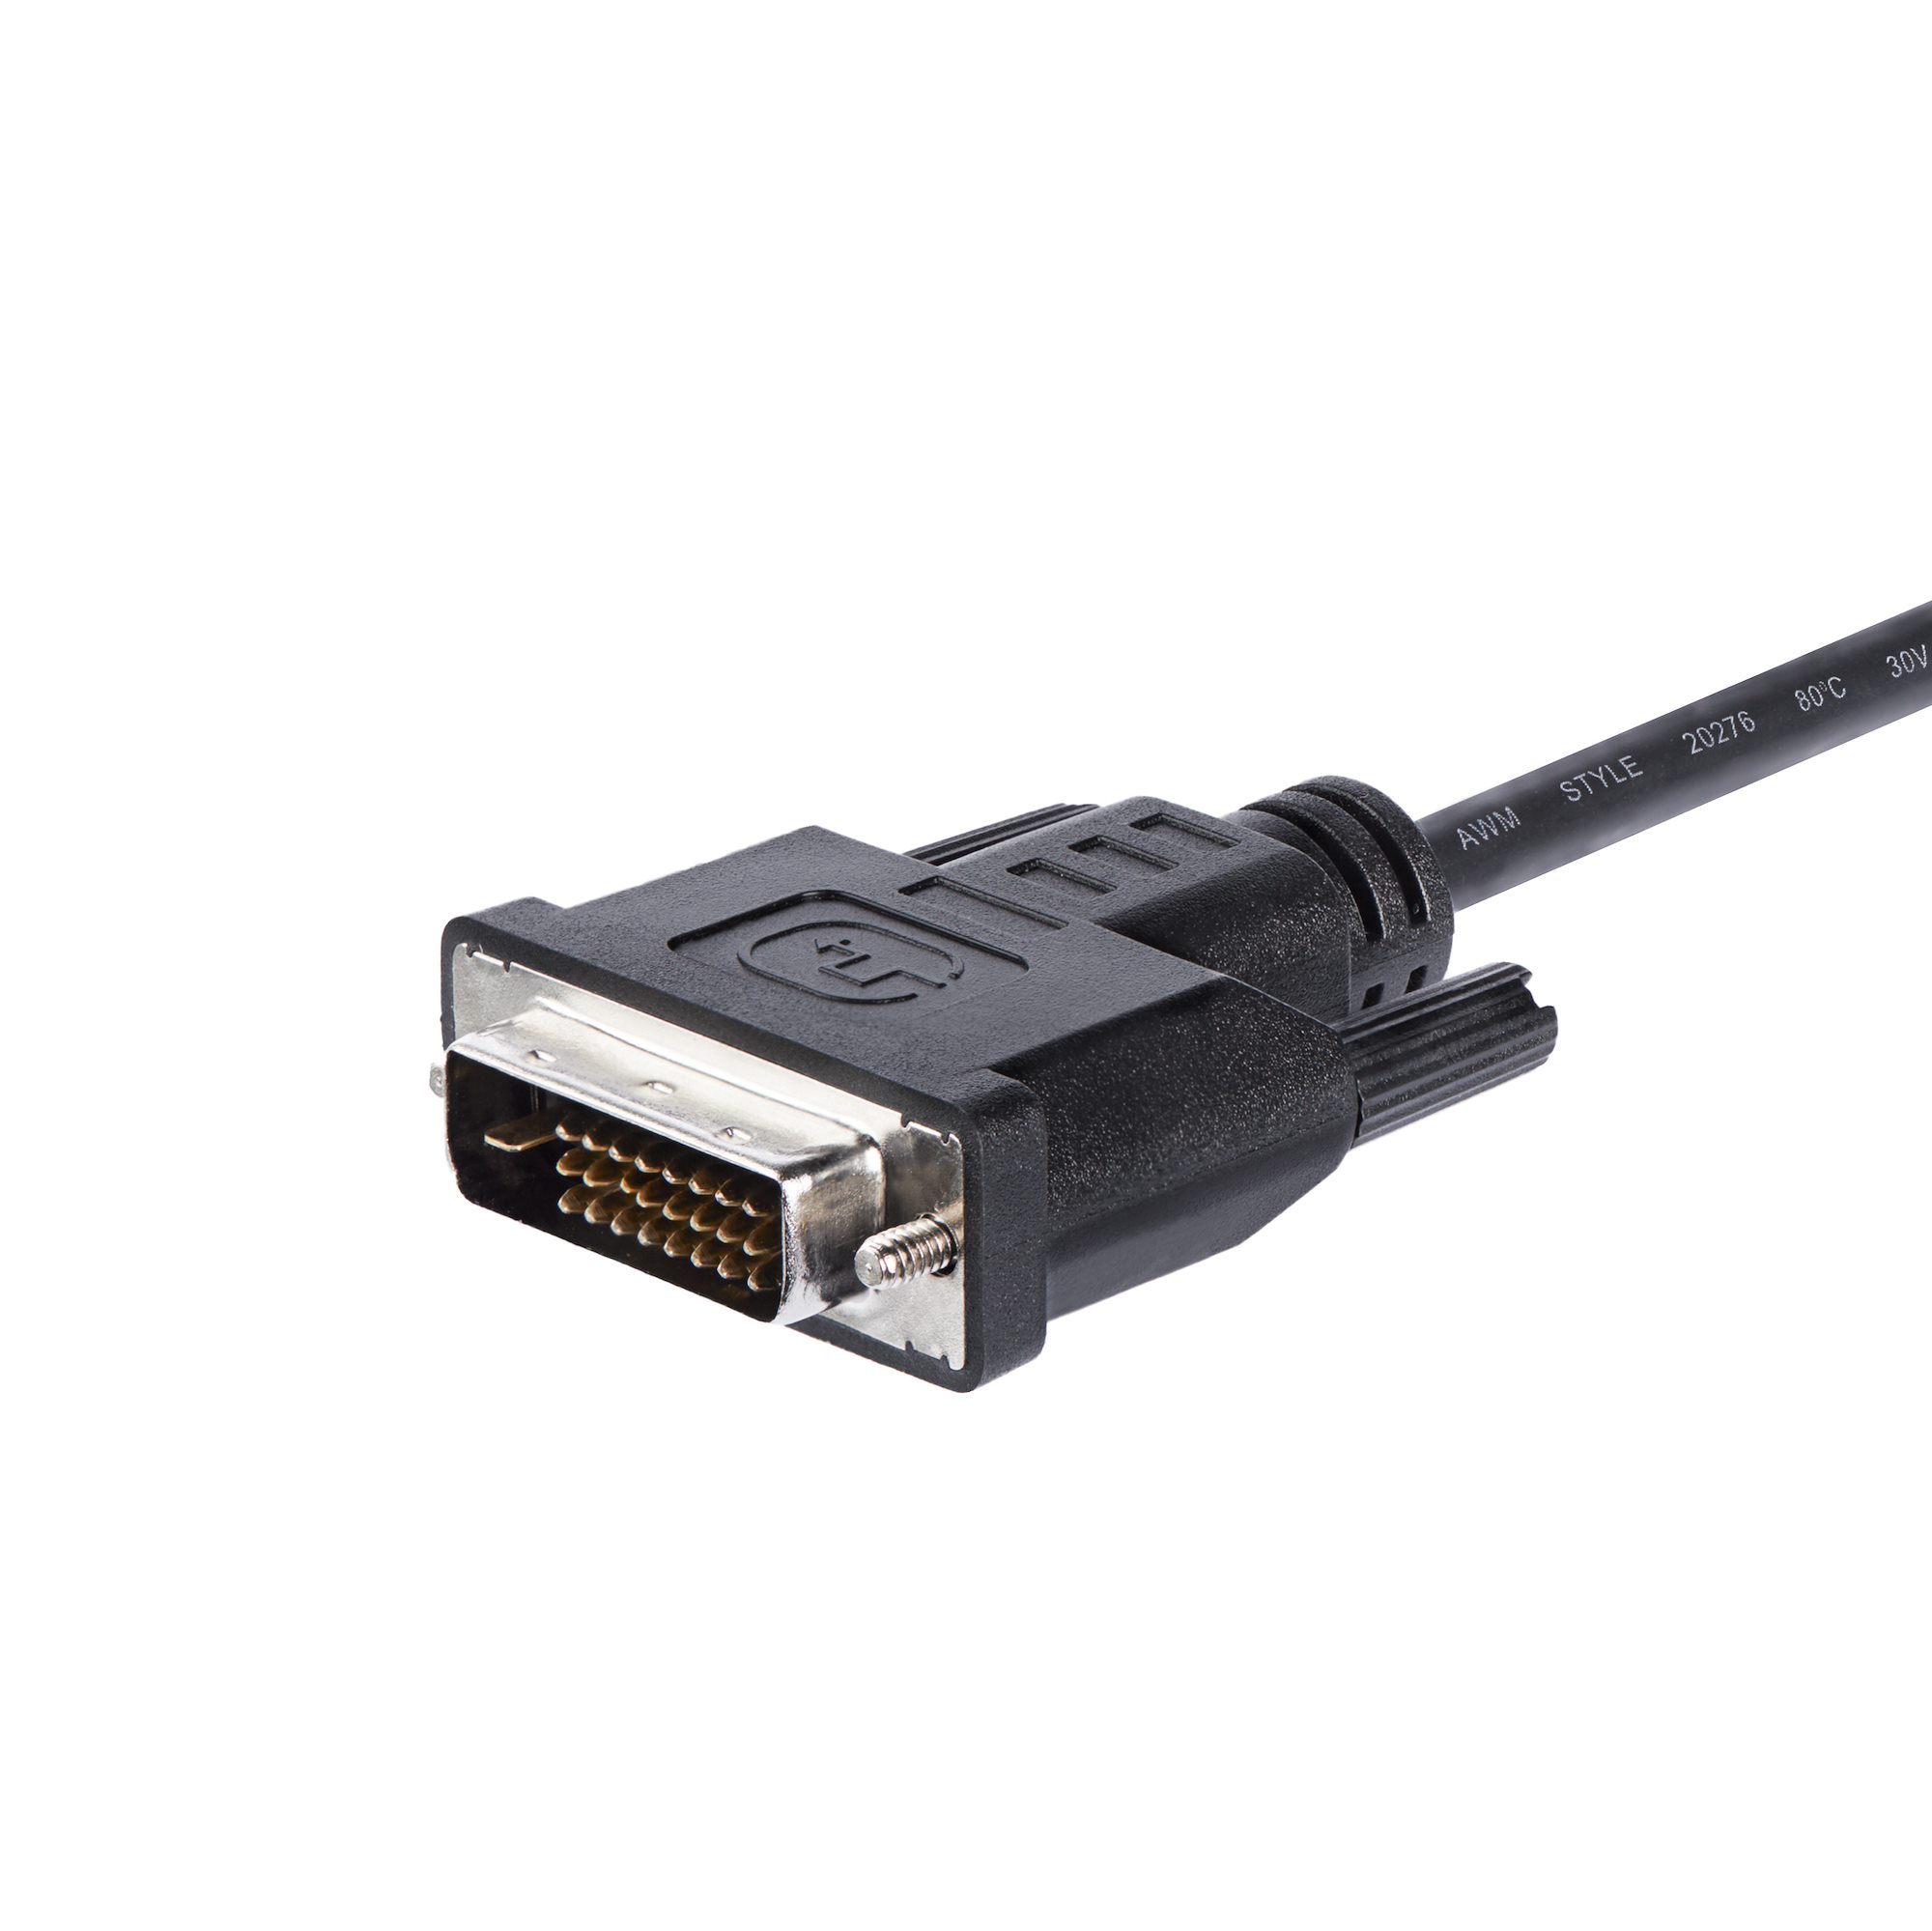 Bother waitress Havoc DVI-D to VGA Adapter - Active - HDMI® and DVI Video Adapters | StarTech.com